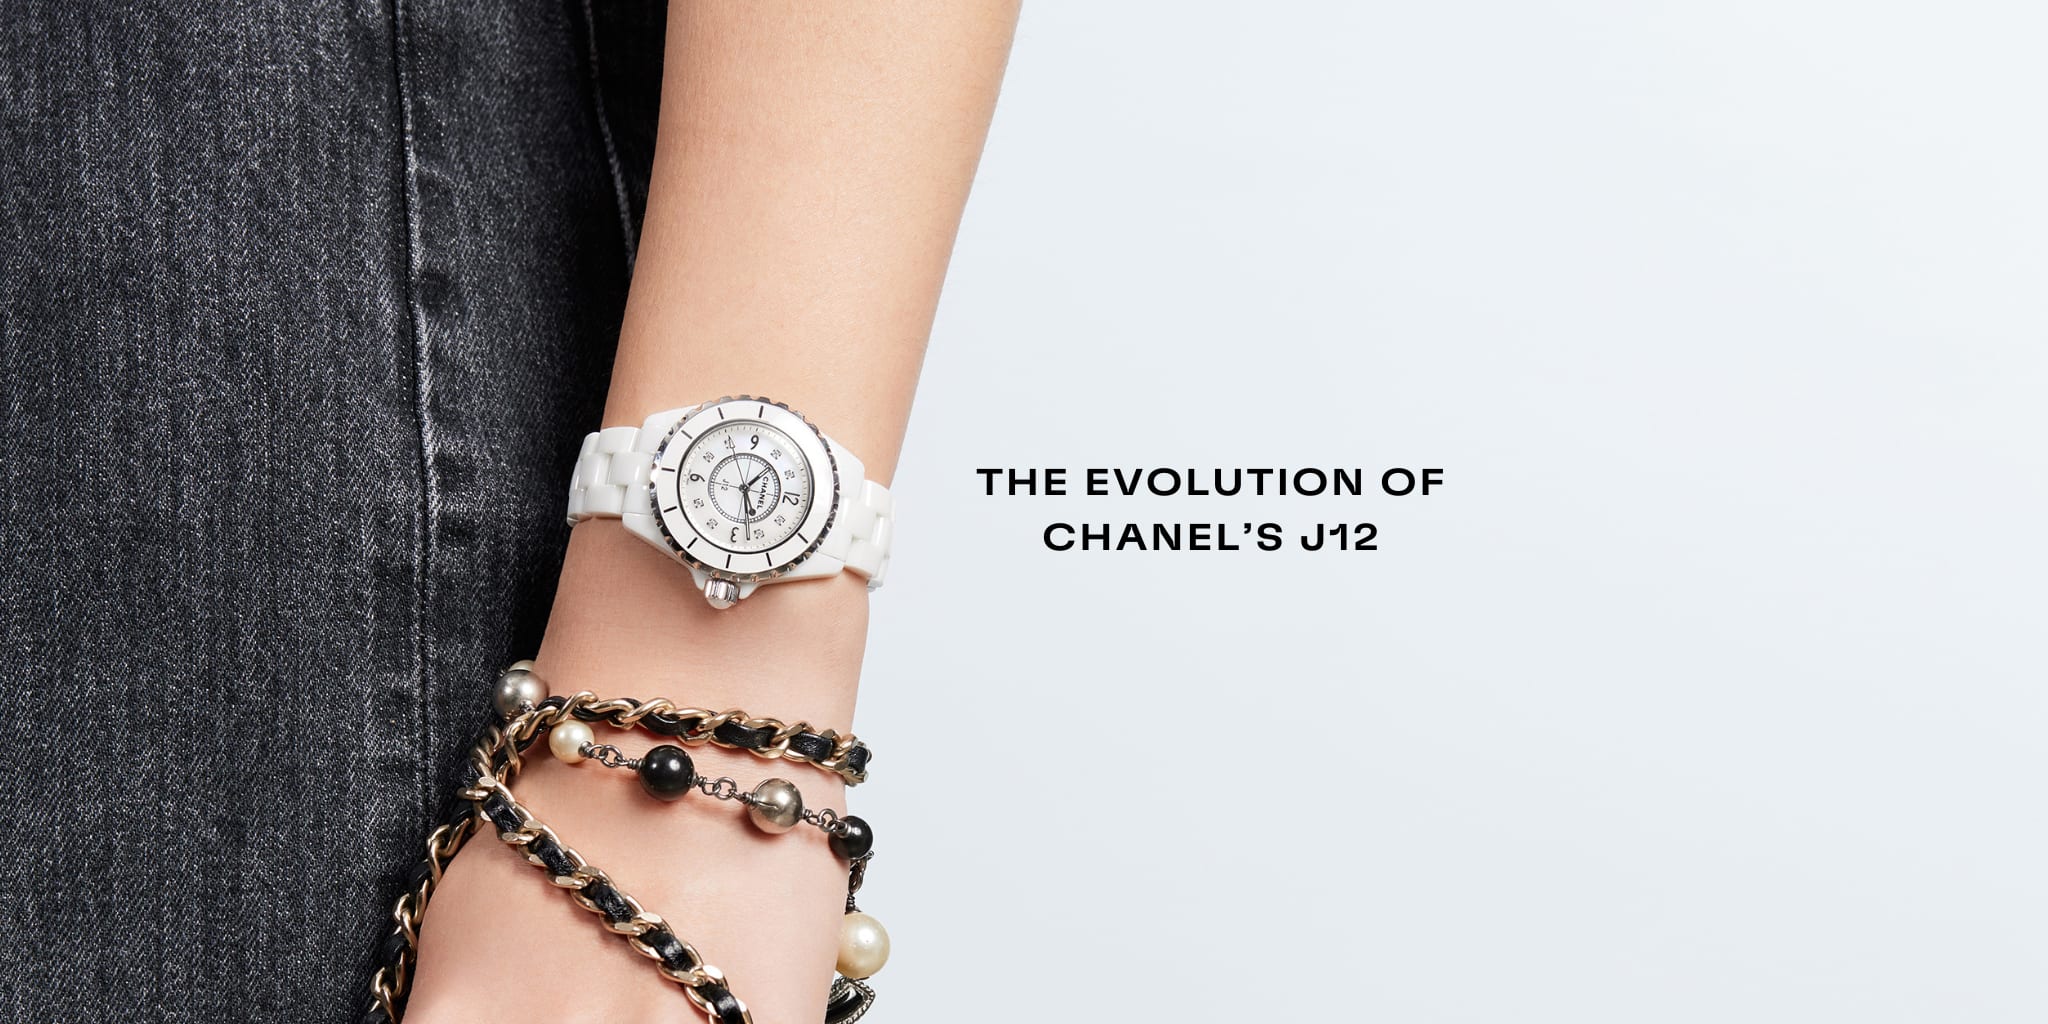 The Evolution Of Chanel’s J12, Explained In 5 Watches